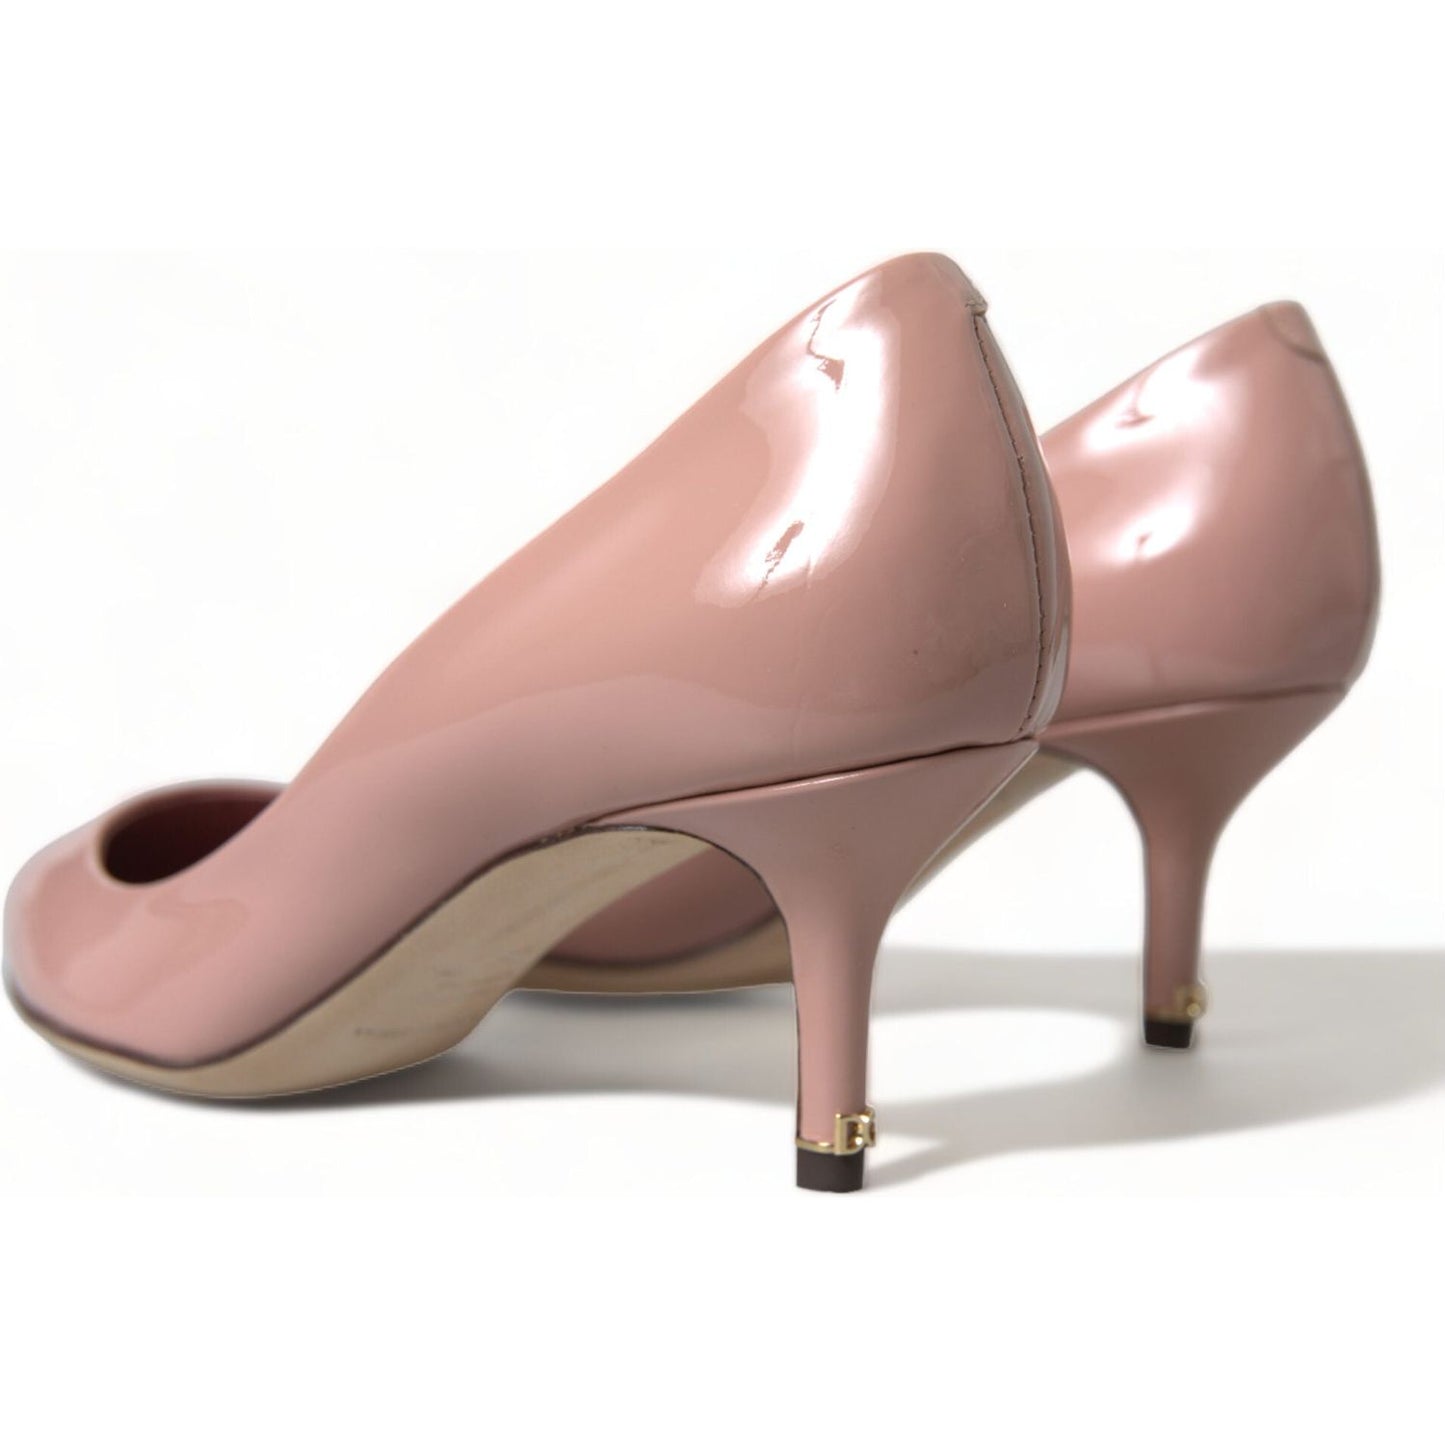 Dolce & Gabbana Pink Patent Stiletto Pumps - Elevate Your Glamour pink-patent-leather-pumps-heels-shoes 465A9865-bg-scaled-0ddbb0ae-d0e.jpg